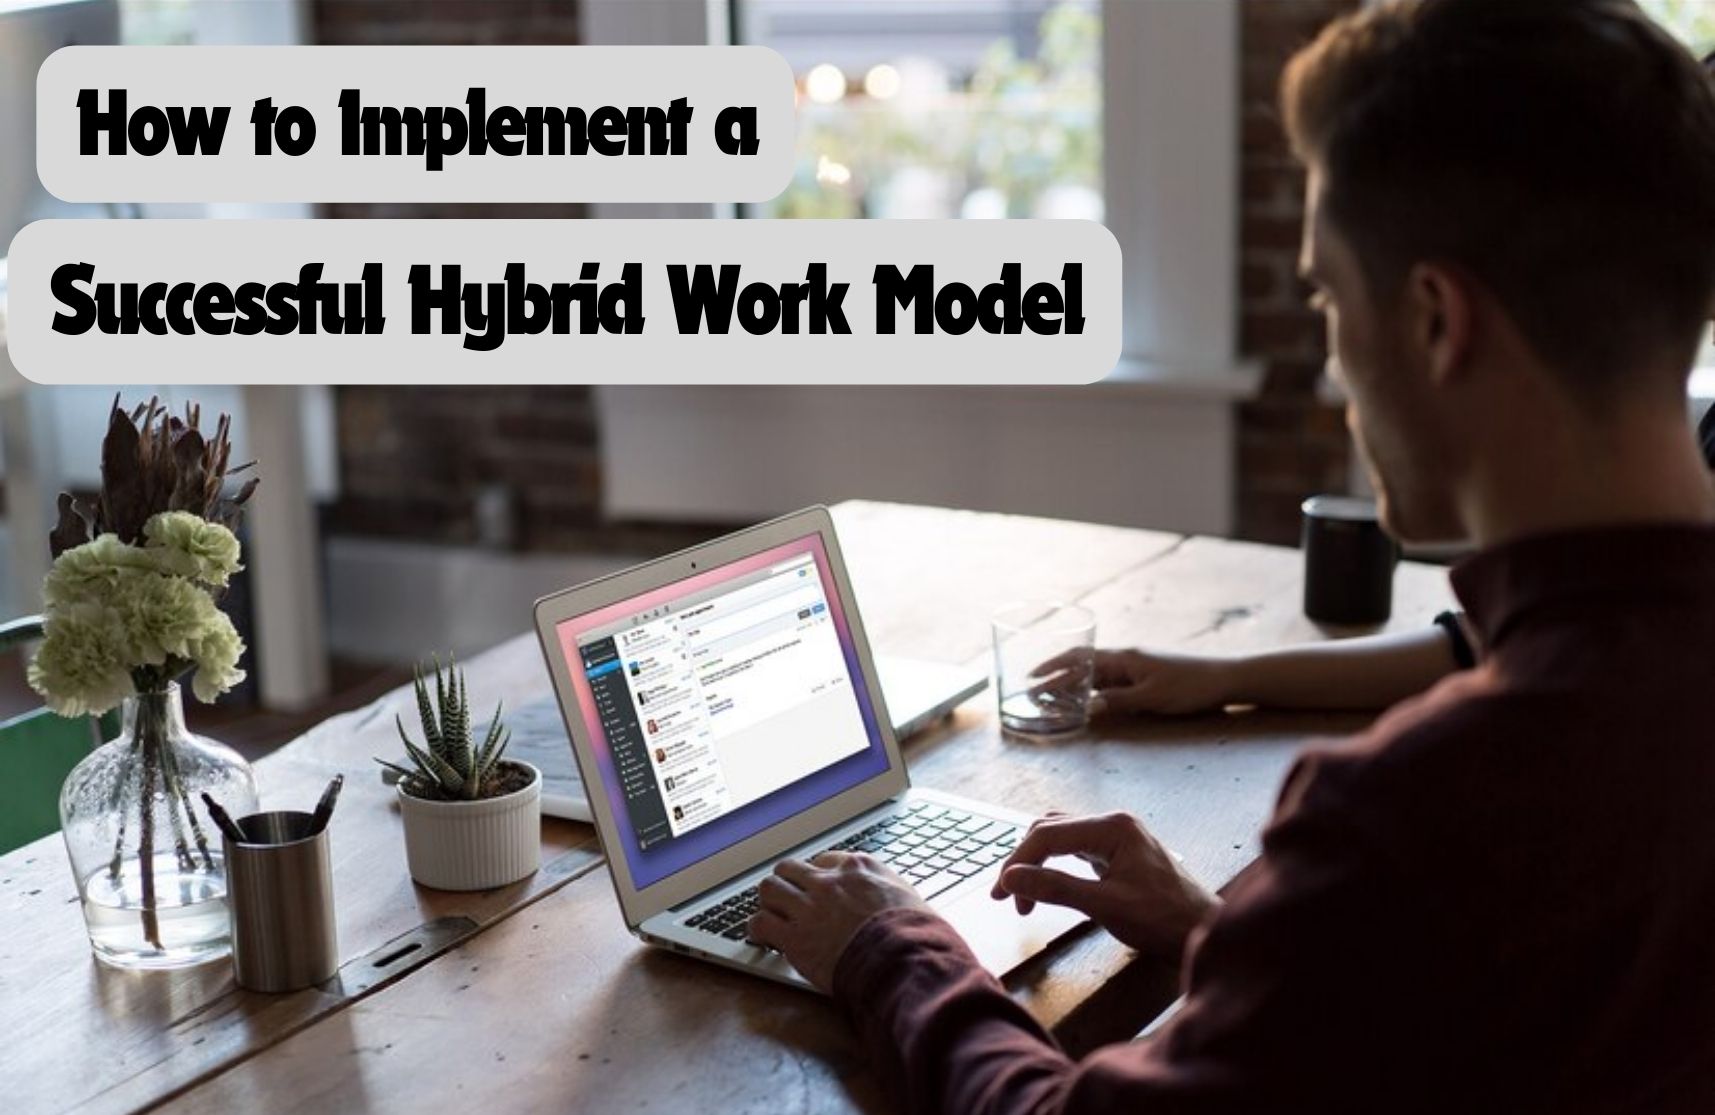 How to Implement a Successful Hybrid Work Model